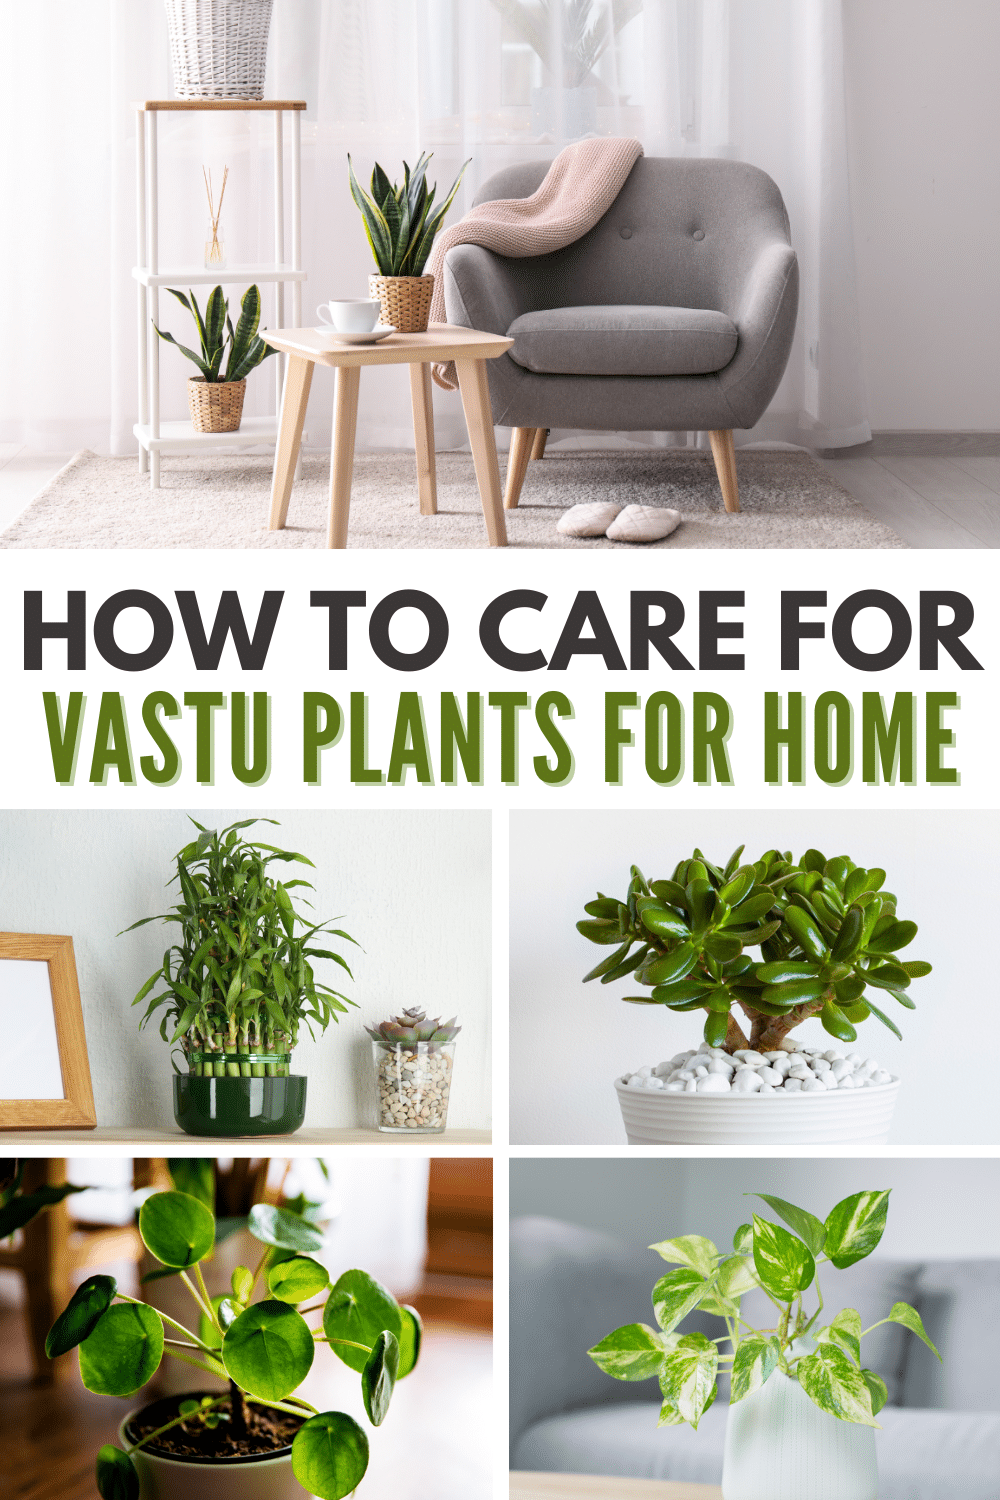  5 images of plants with title text reading How to Care for Vastu Plants for Home.